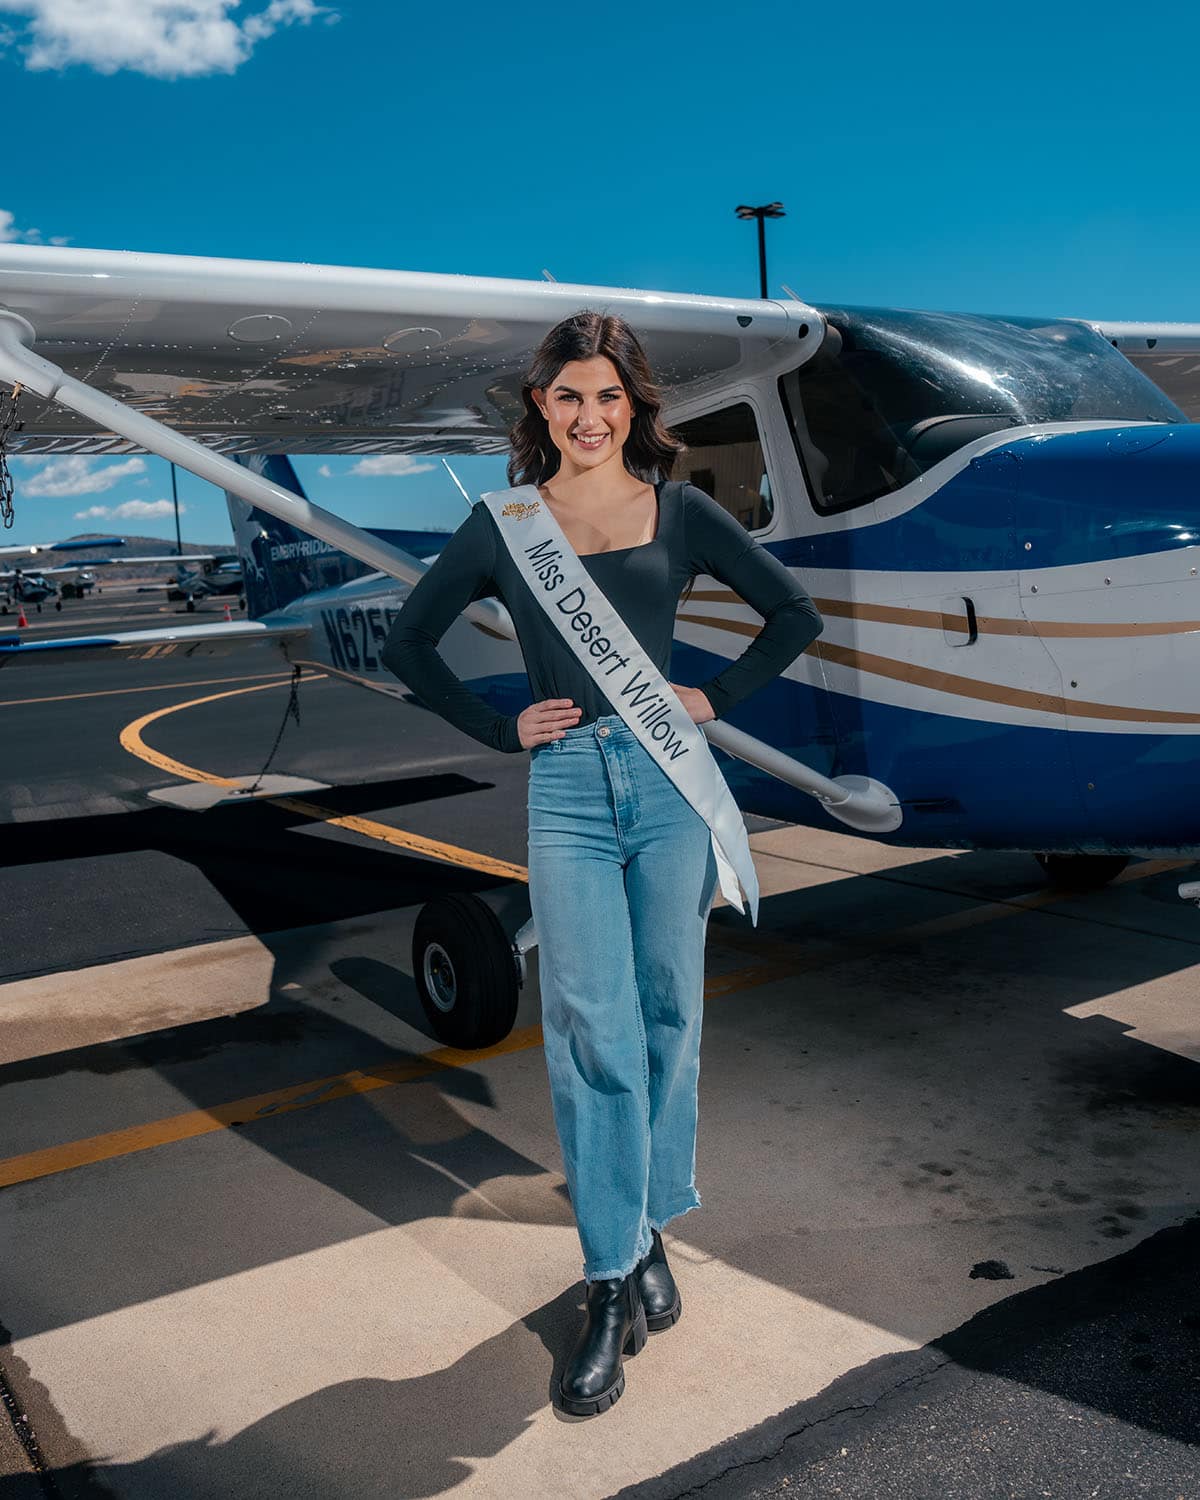 Embry-Riddle Aeronautical Science student Serena Fechter will be competing in the 2024 Miss Arizona pageant. (Photo: Embry-Riddle/Connor McShane)